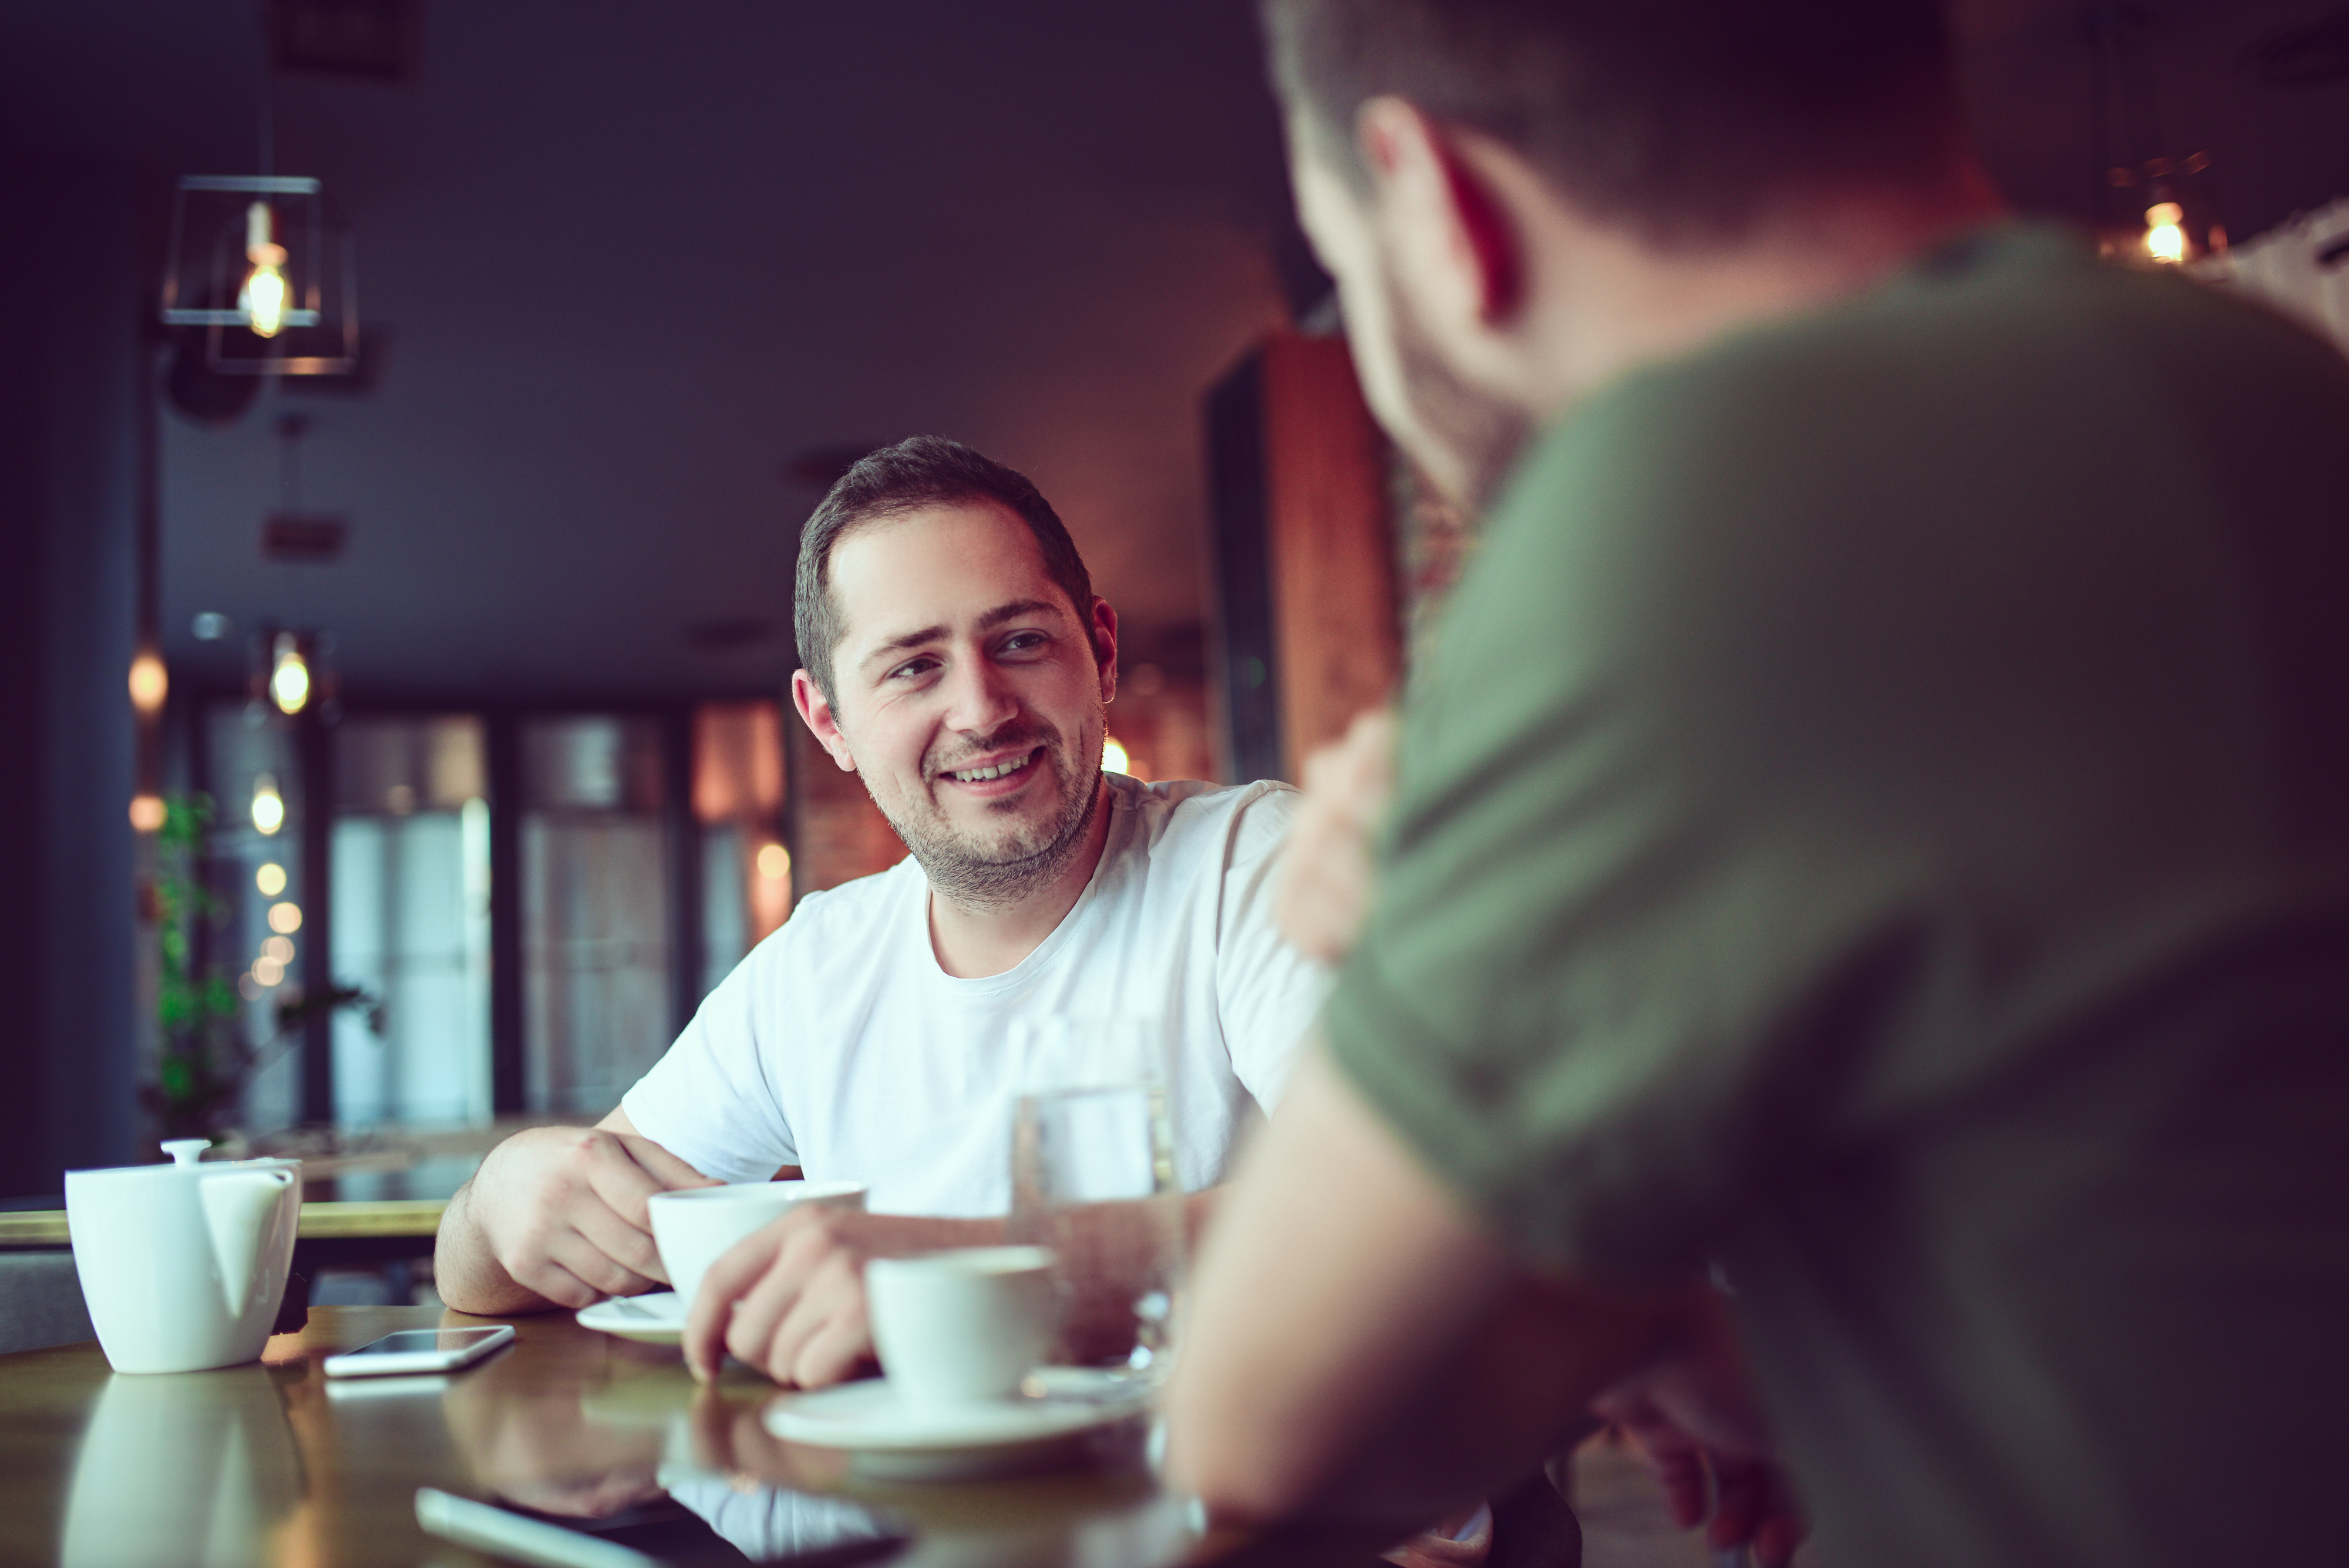 Two people having a conversation at a cafe table with cups in front of them. One is facing the camera smiling